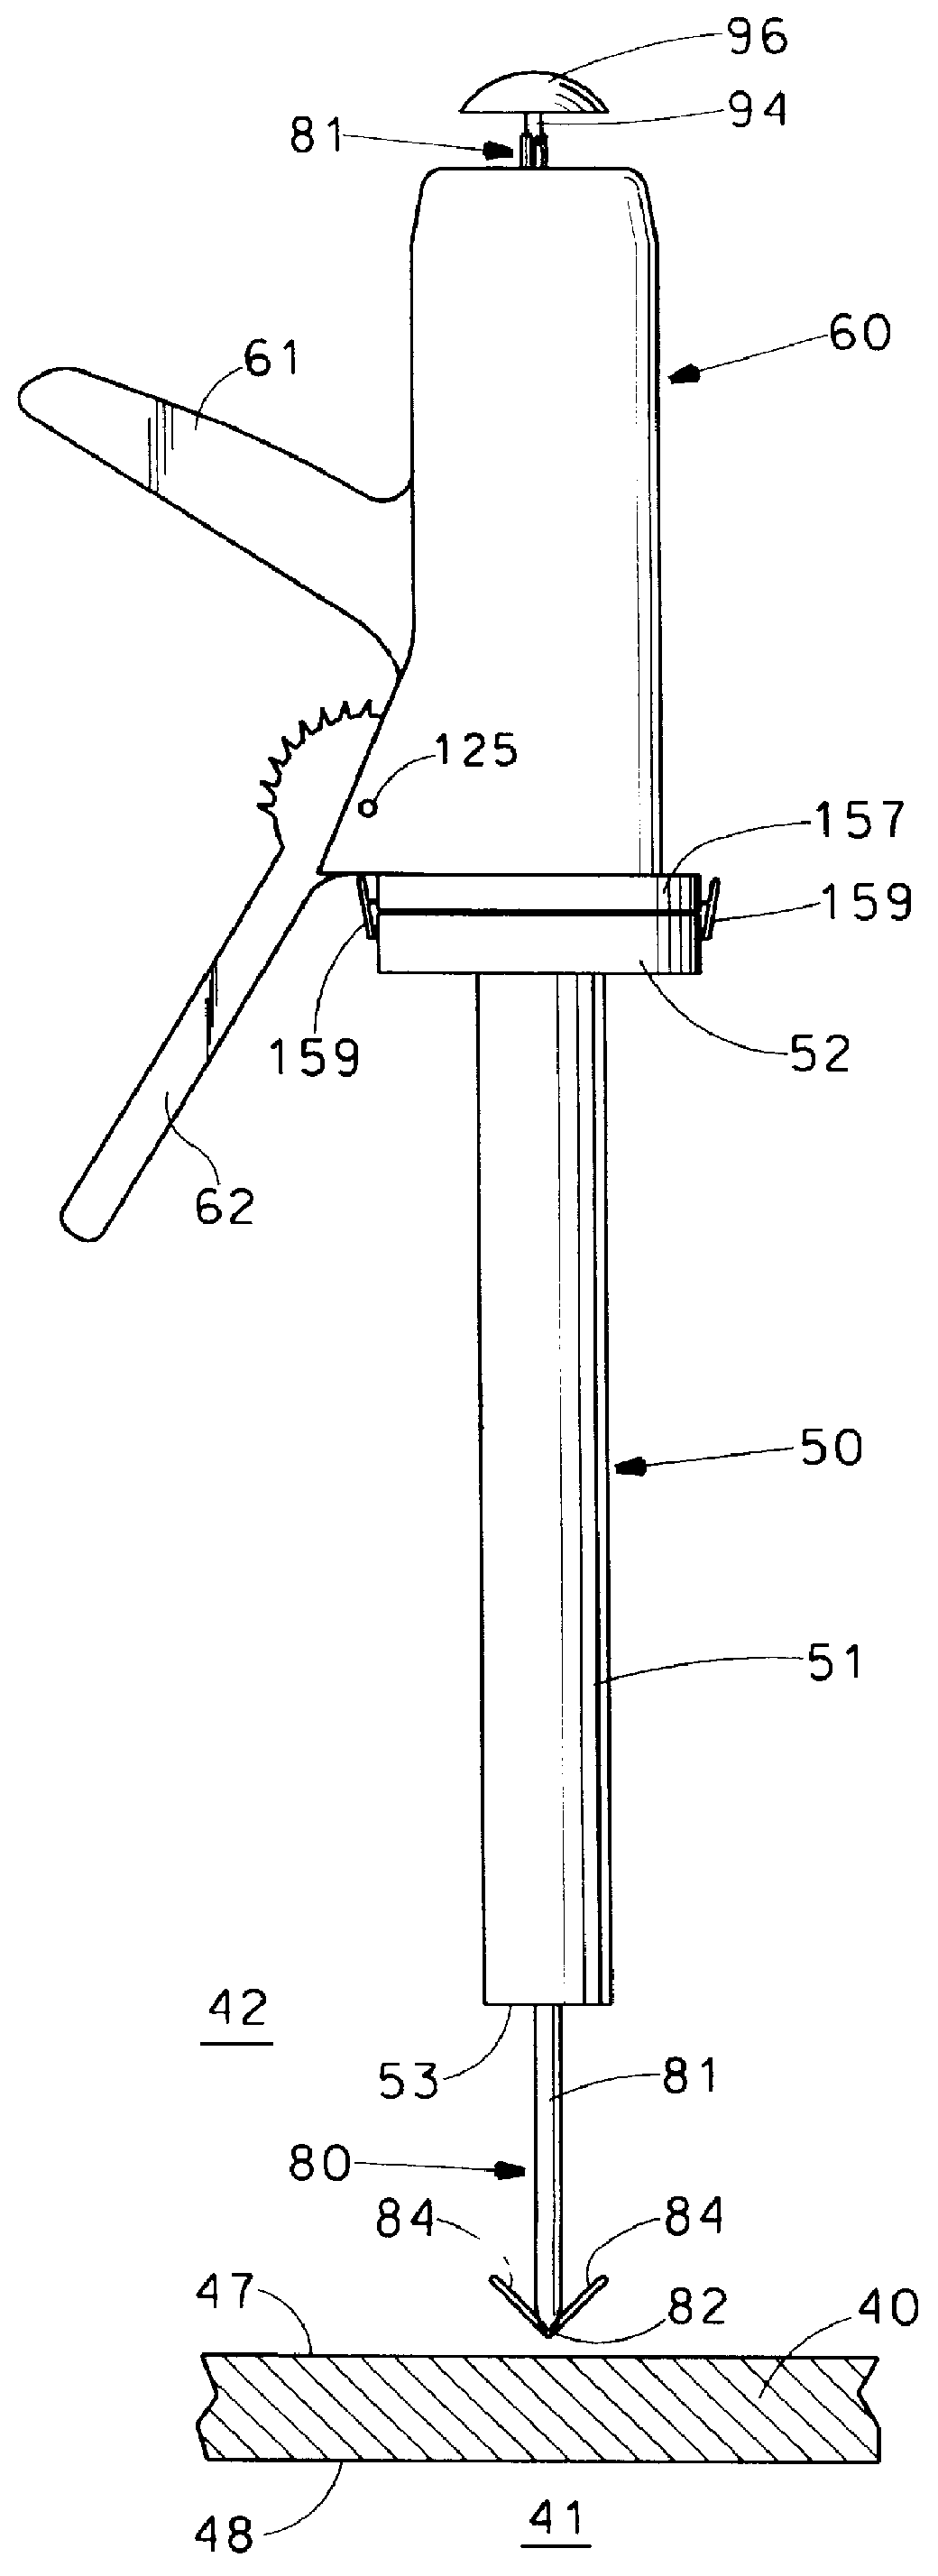 Apparatus and methods for the penetration of tissue, and the creation of an opening therein